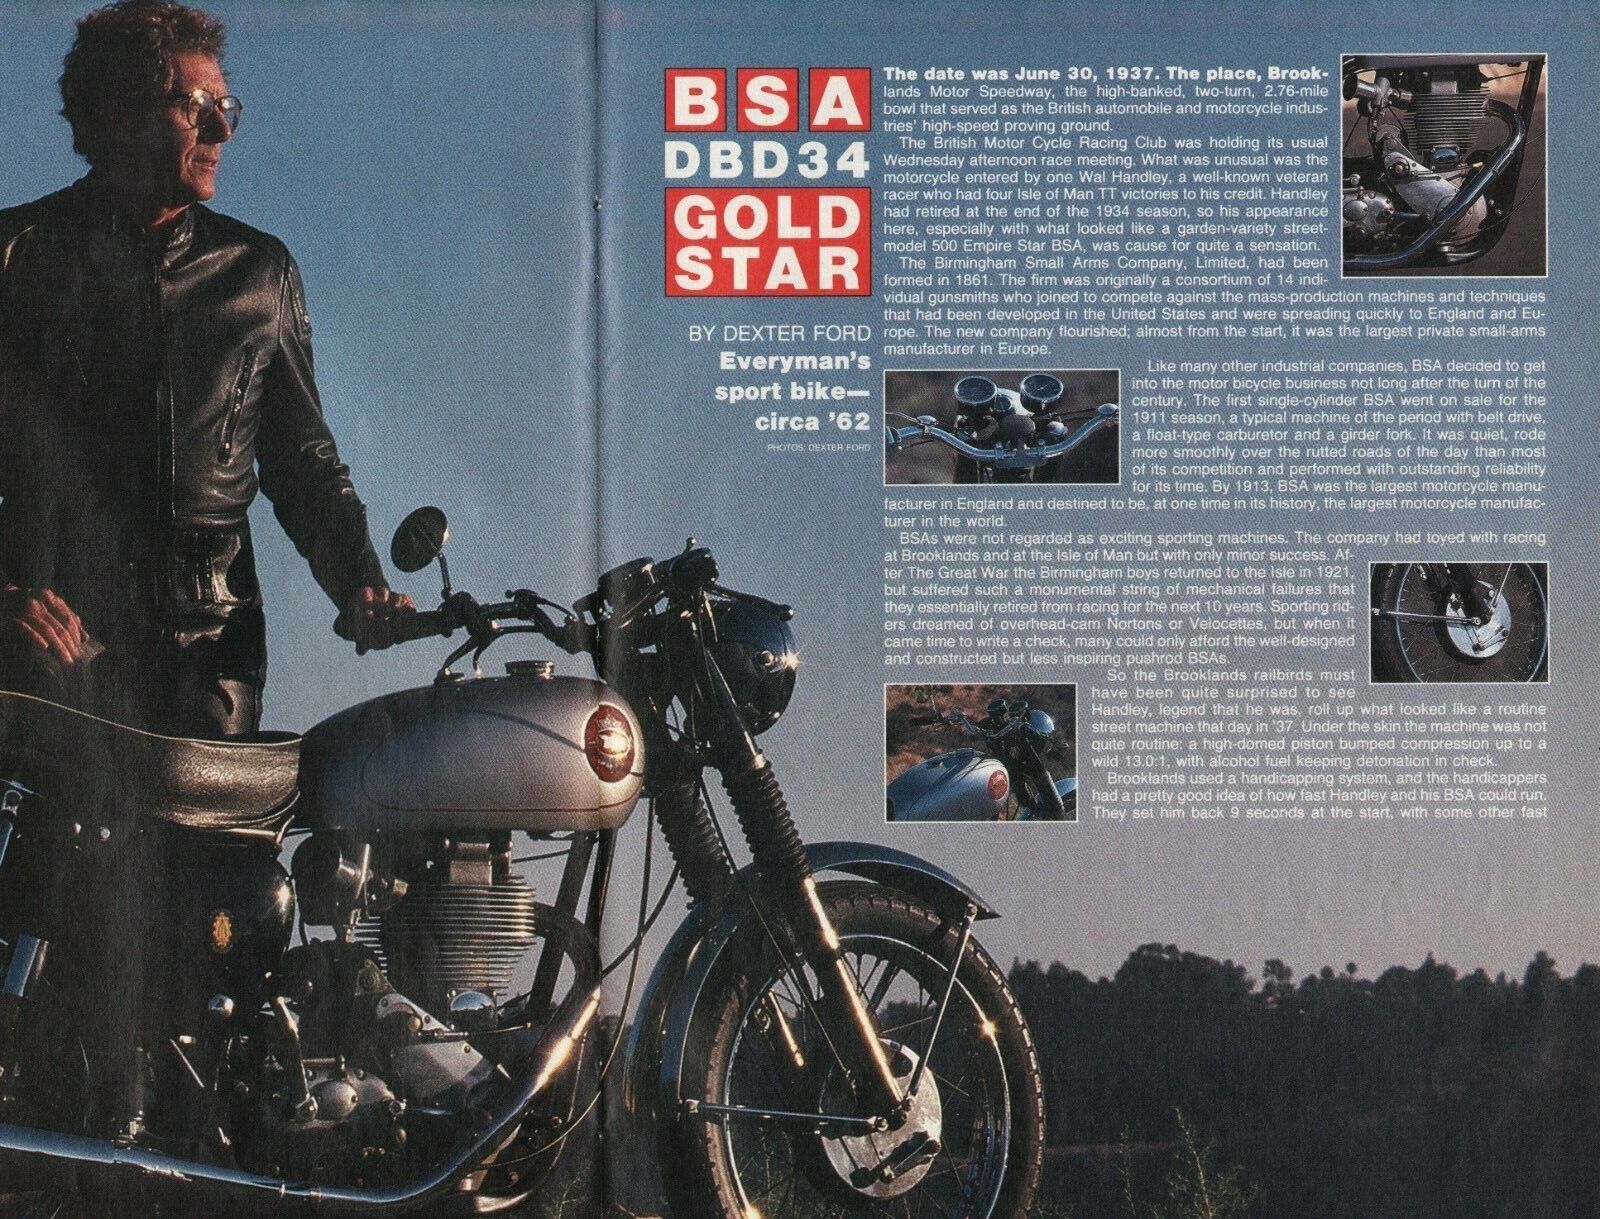 1989 Article: 1962 BSA DBD34 Gold Star 500 - 4-Page Vintage Motorcycle Article